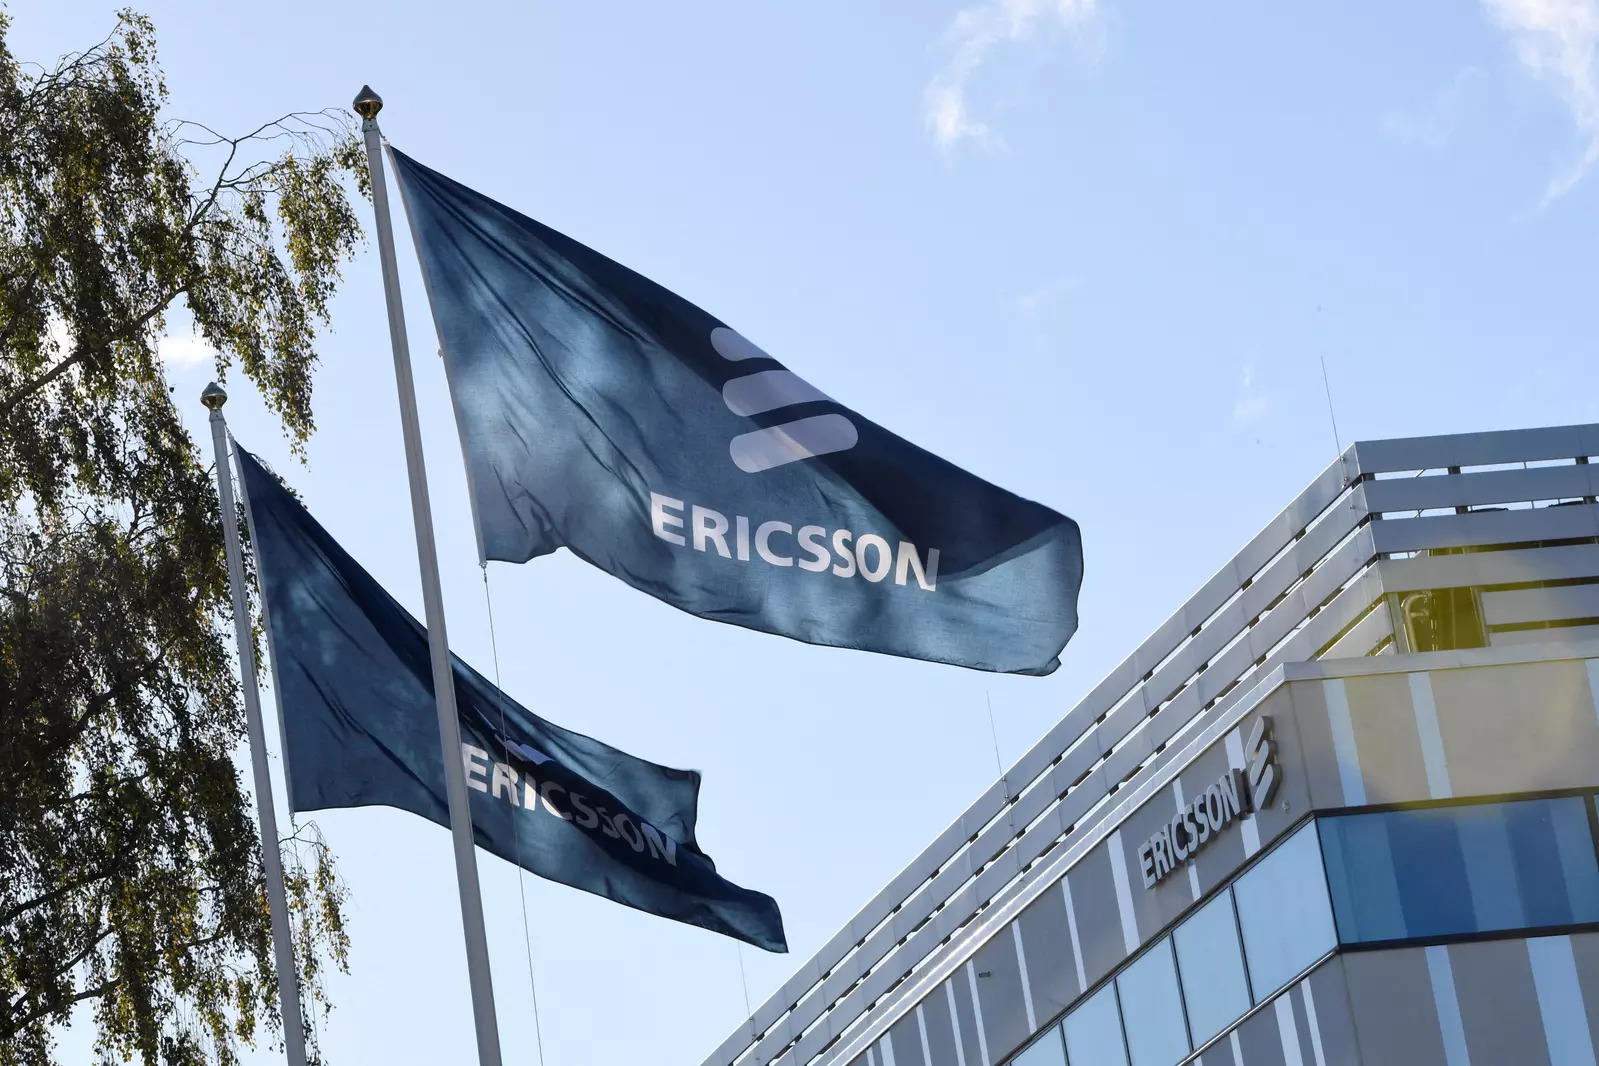  FILE PHOTO: Flags with Ericsson logo are pictured outside company's head office in Stockholm, Sweden, October 4 , 2016. TT NEWS AGENCY/Maja Suslin via REUTERS.